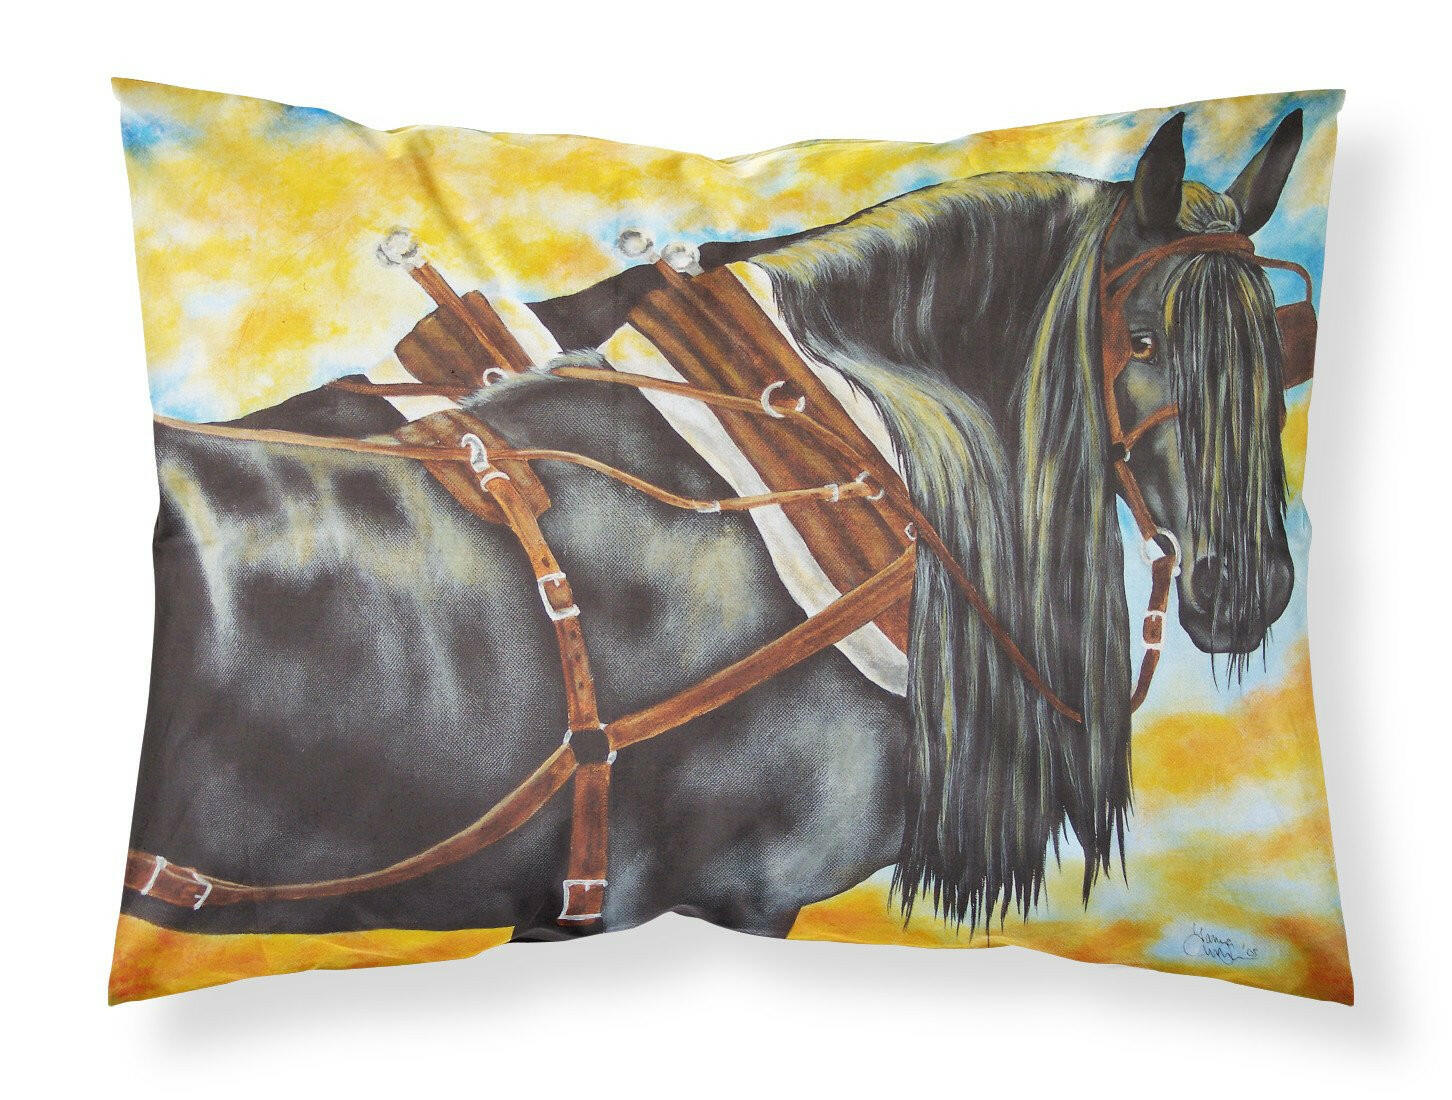 Day's End Horse Fabric Standard Pillowcase AMB1238PILLOWCASE by Caroline's Treasures